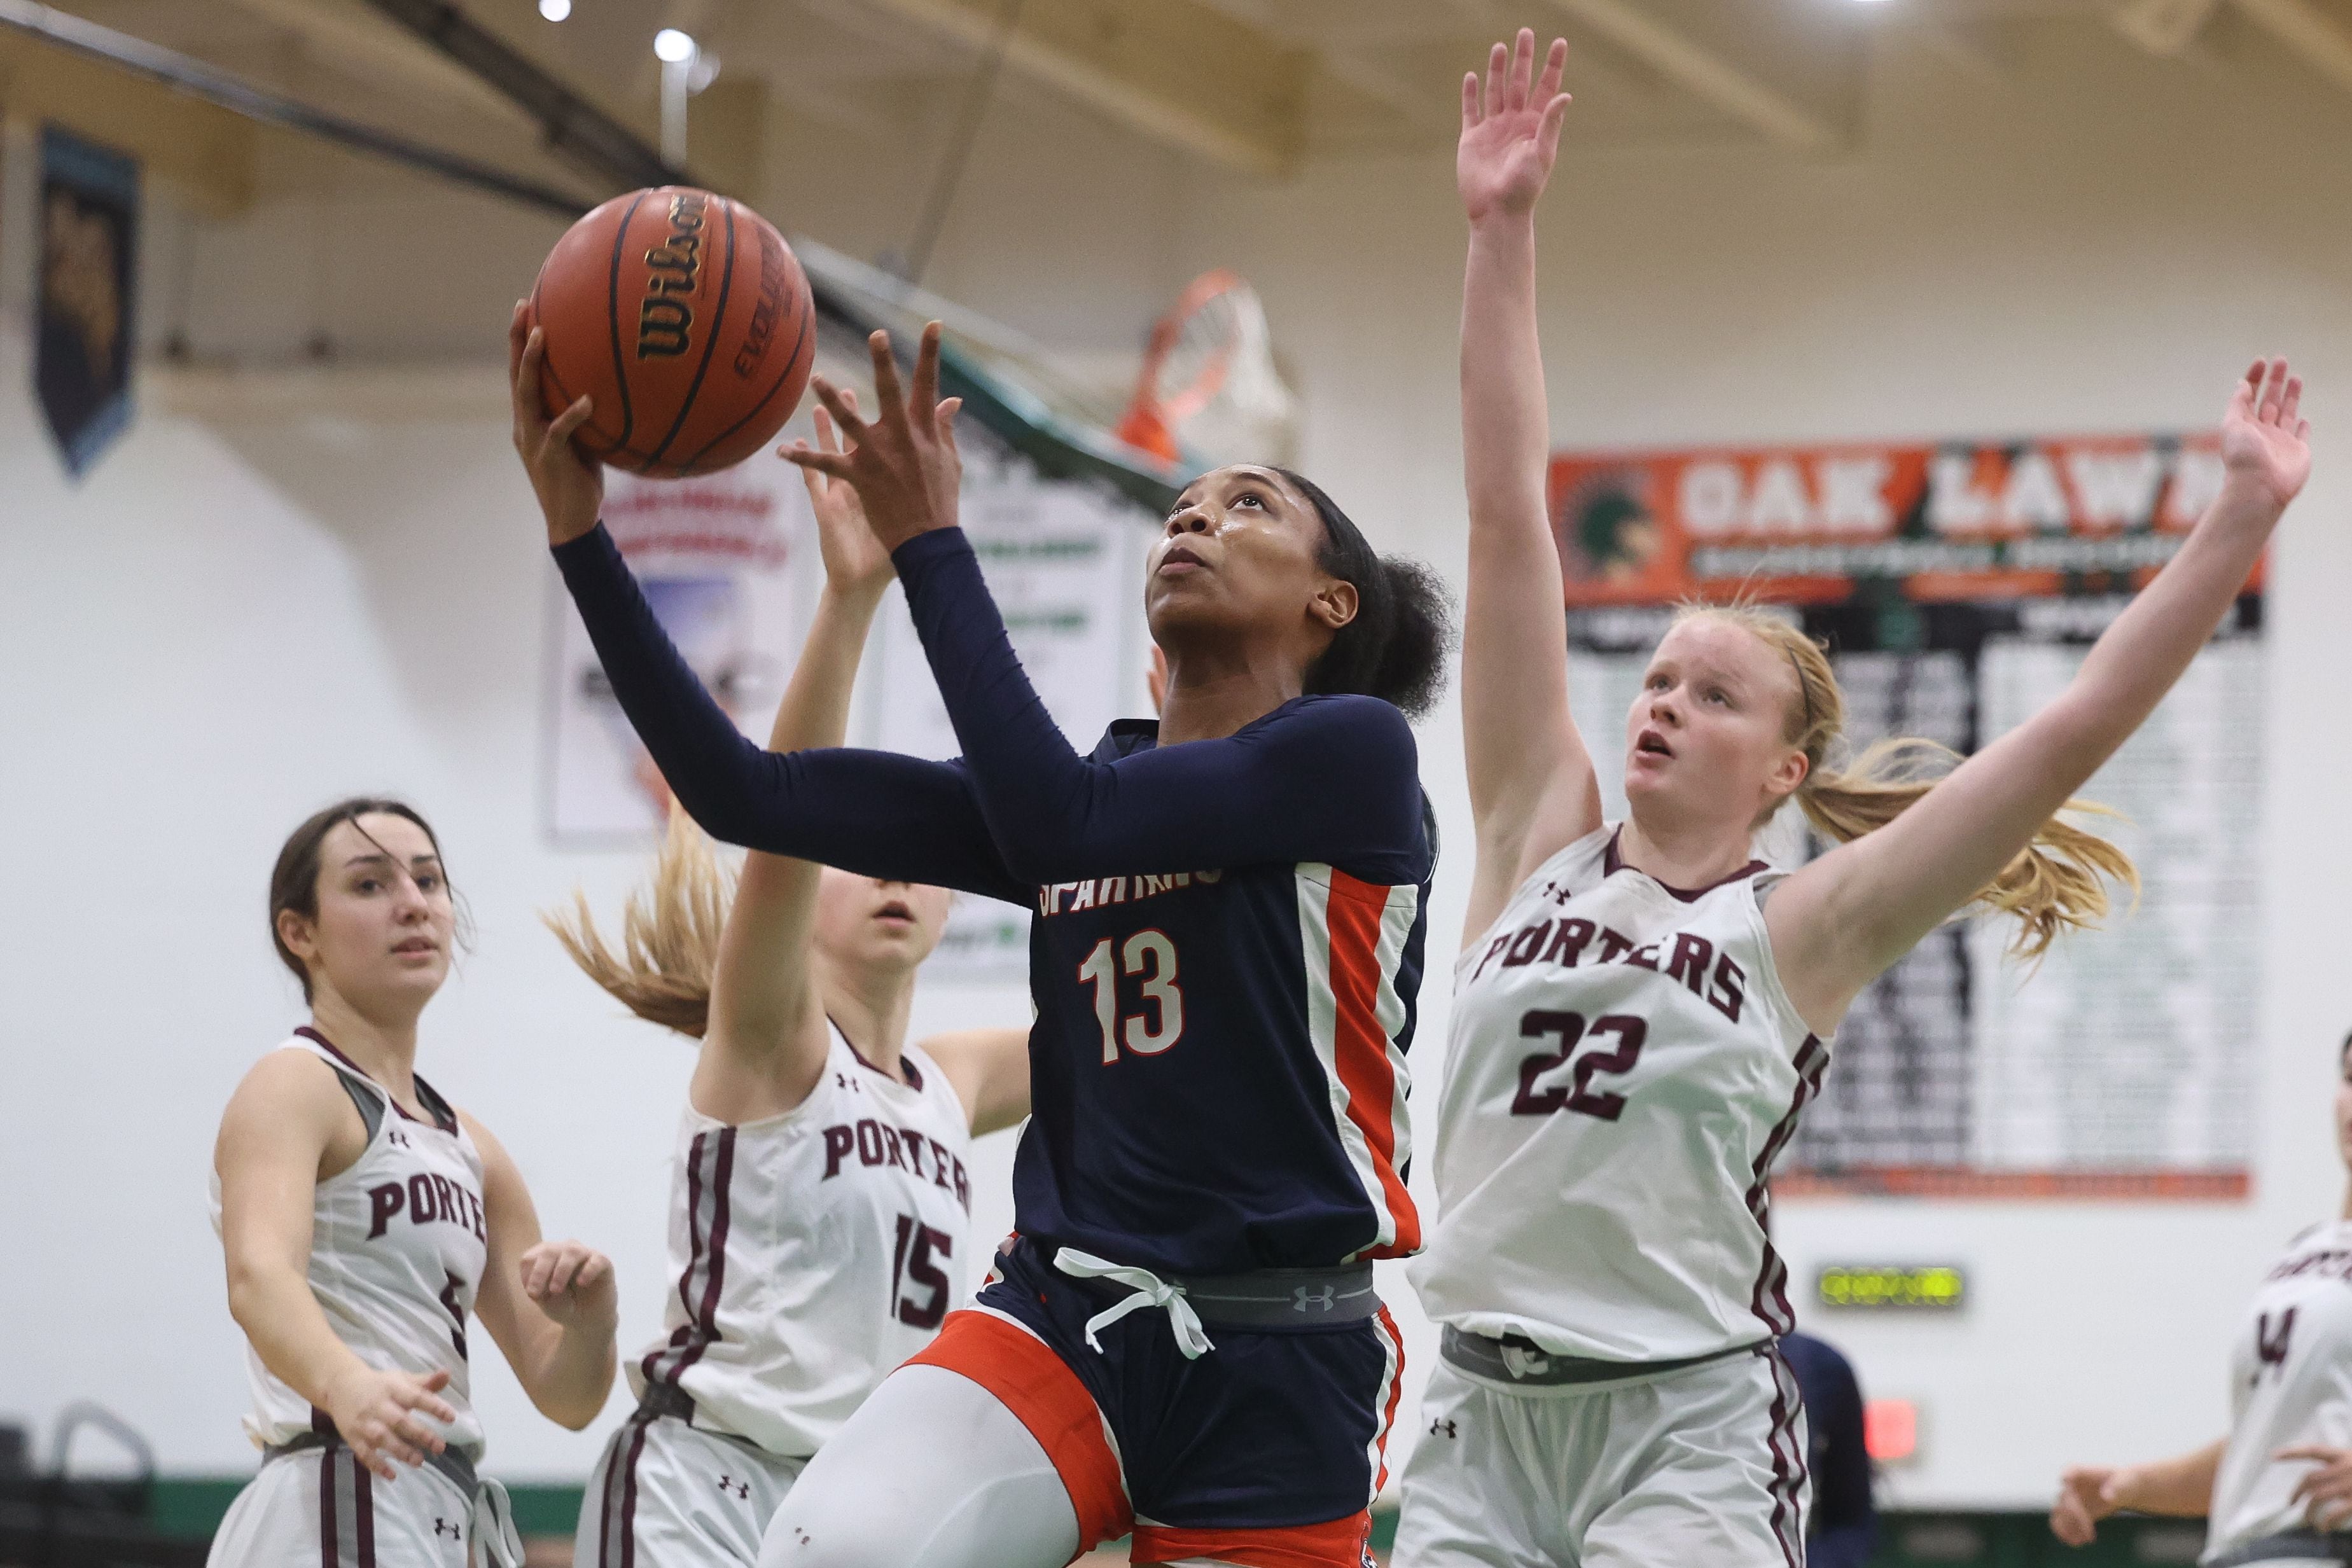 Romeoville’s Jadea Johnson lays in a shot against Lockport in the Oak Lawn Holiday Tournament championship on Saturday, Dec.16th in Oak Lawn.